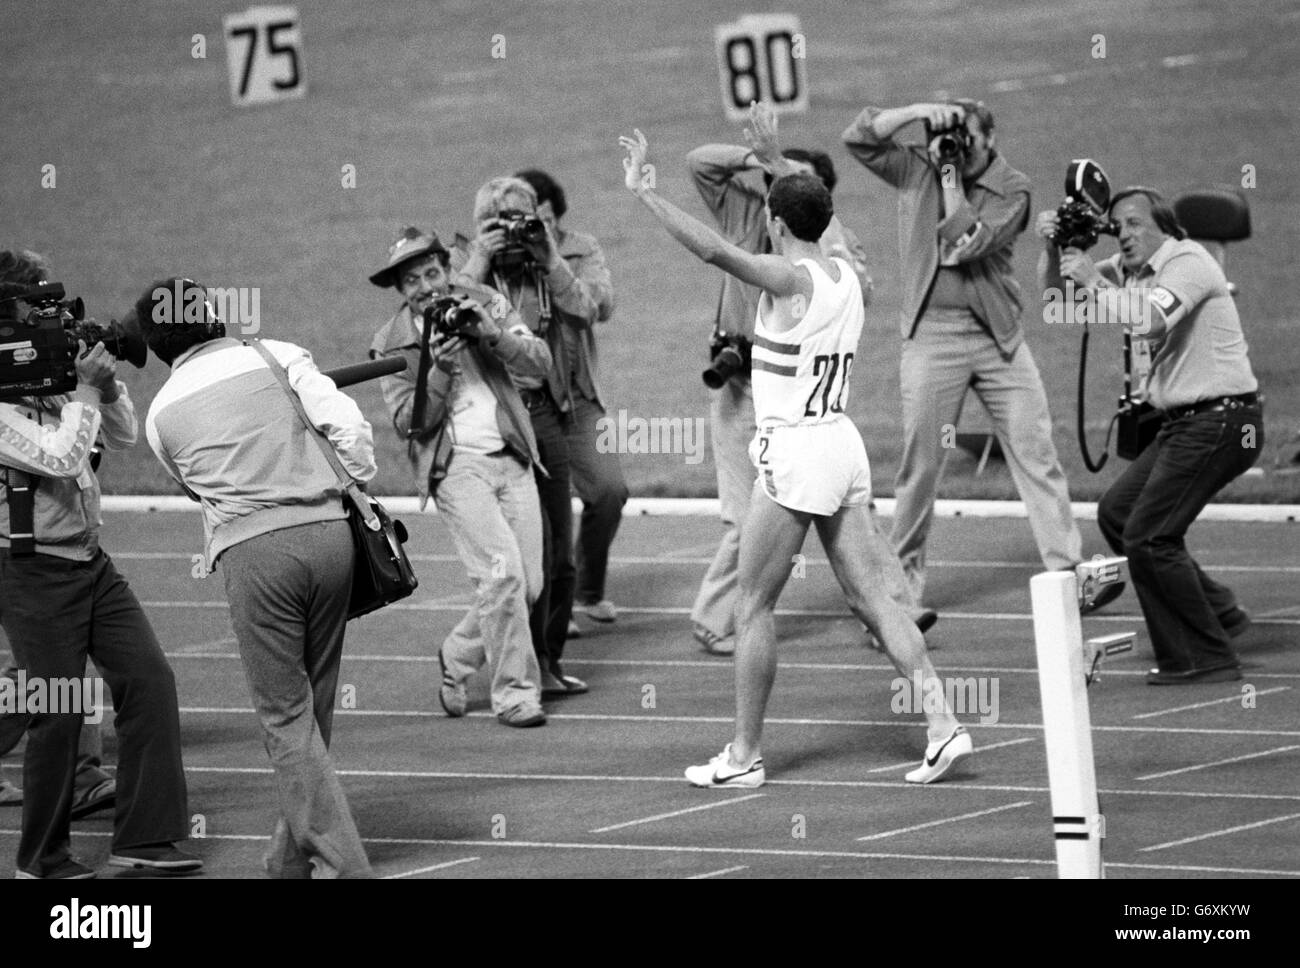 Athletics - 1980 Moscow Olympics - Men's 800 metres. Steve Ovett of Great Britain celebrates winning the 800-meter gold medal. Stock Photo